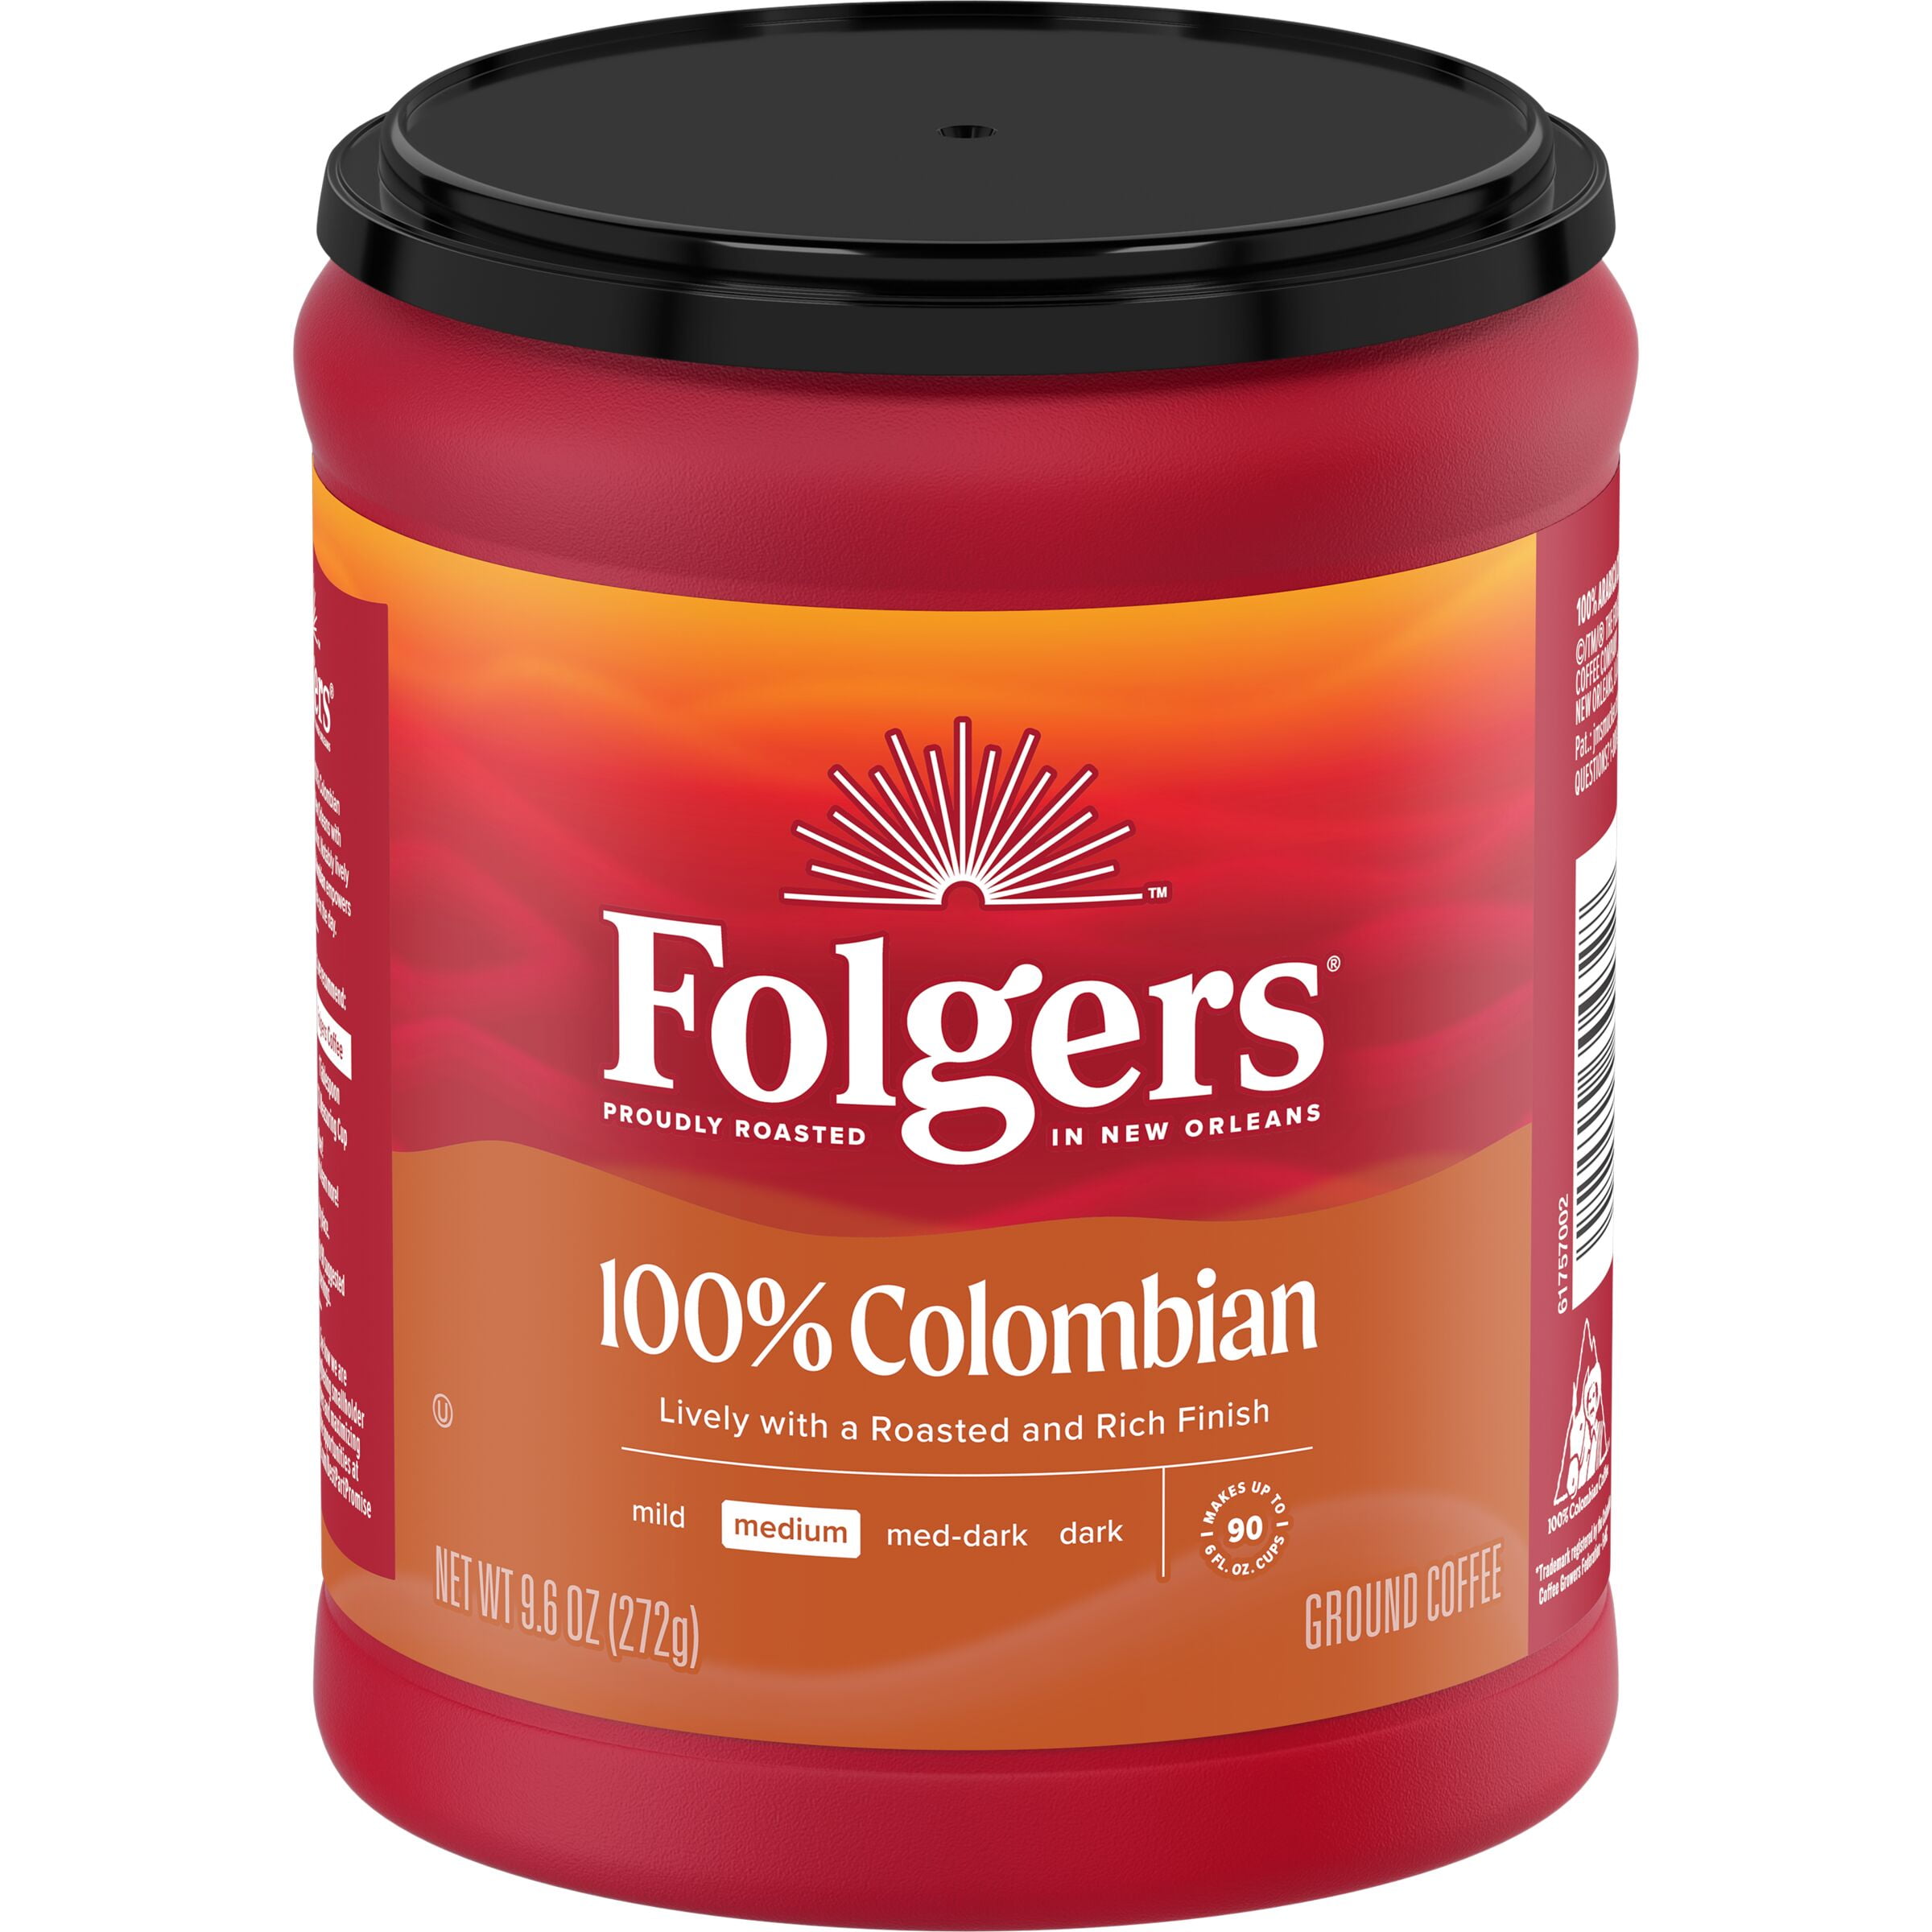 Folgers 100% Colombian Coffee, Medium Roast Ground Coffee, 9.6 Ounce Canister